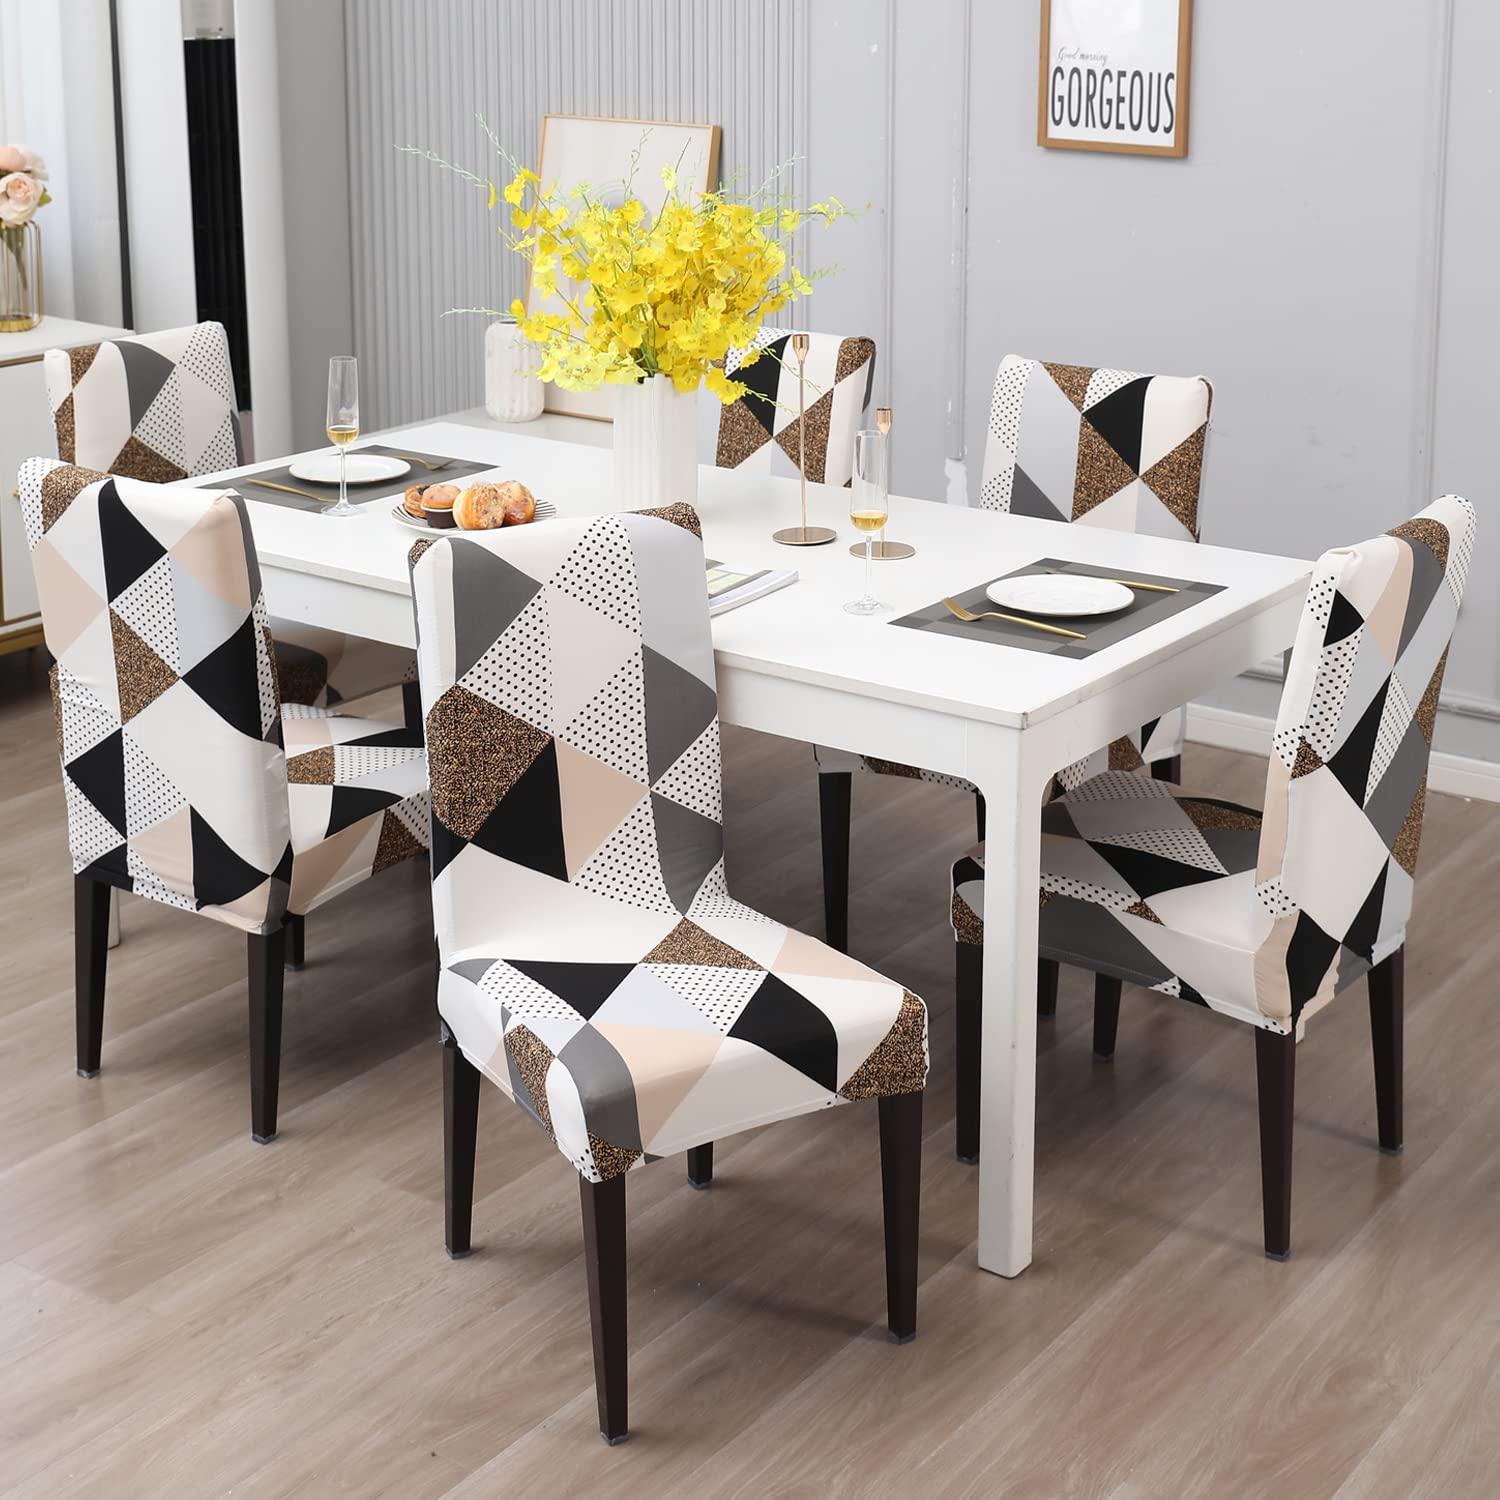 Stretchable Chair Covers, Geometric Brown